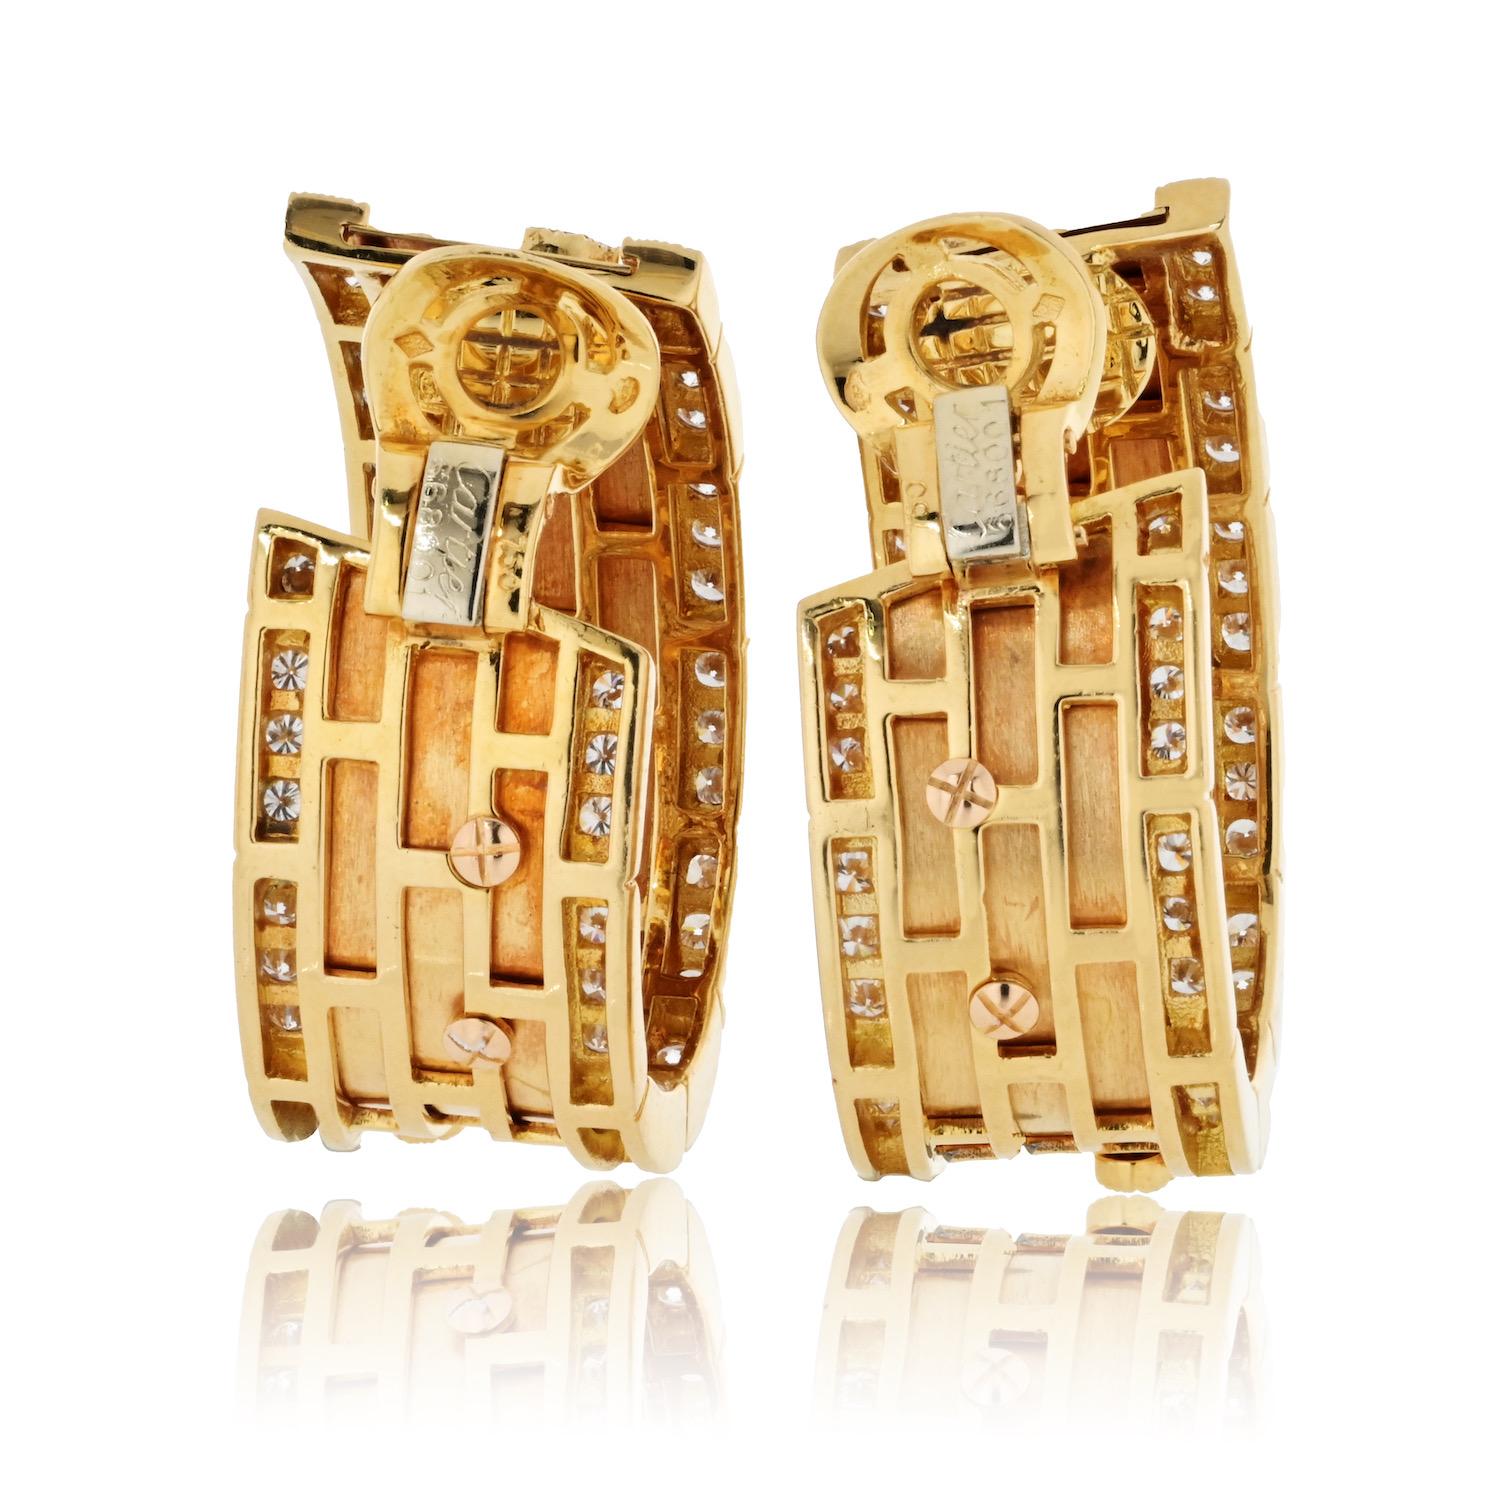 Cartier 18K Yellow Gold Diamond Walking Panthere Earrings In Excellent Condition For Sale In New York, NY